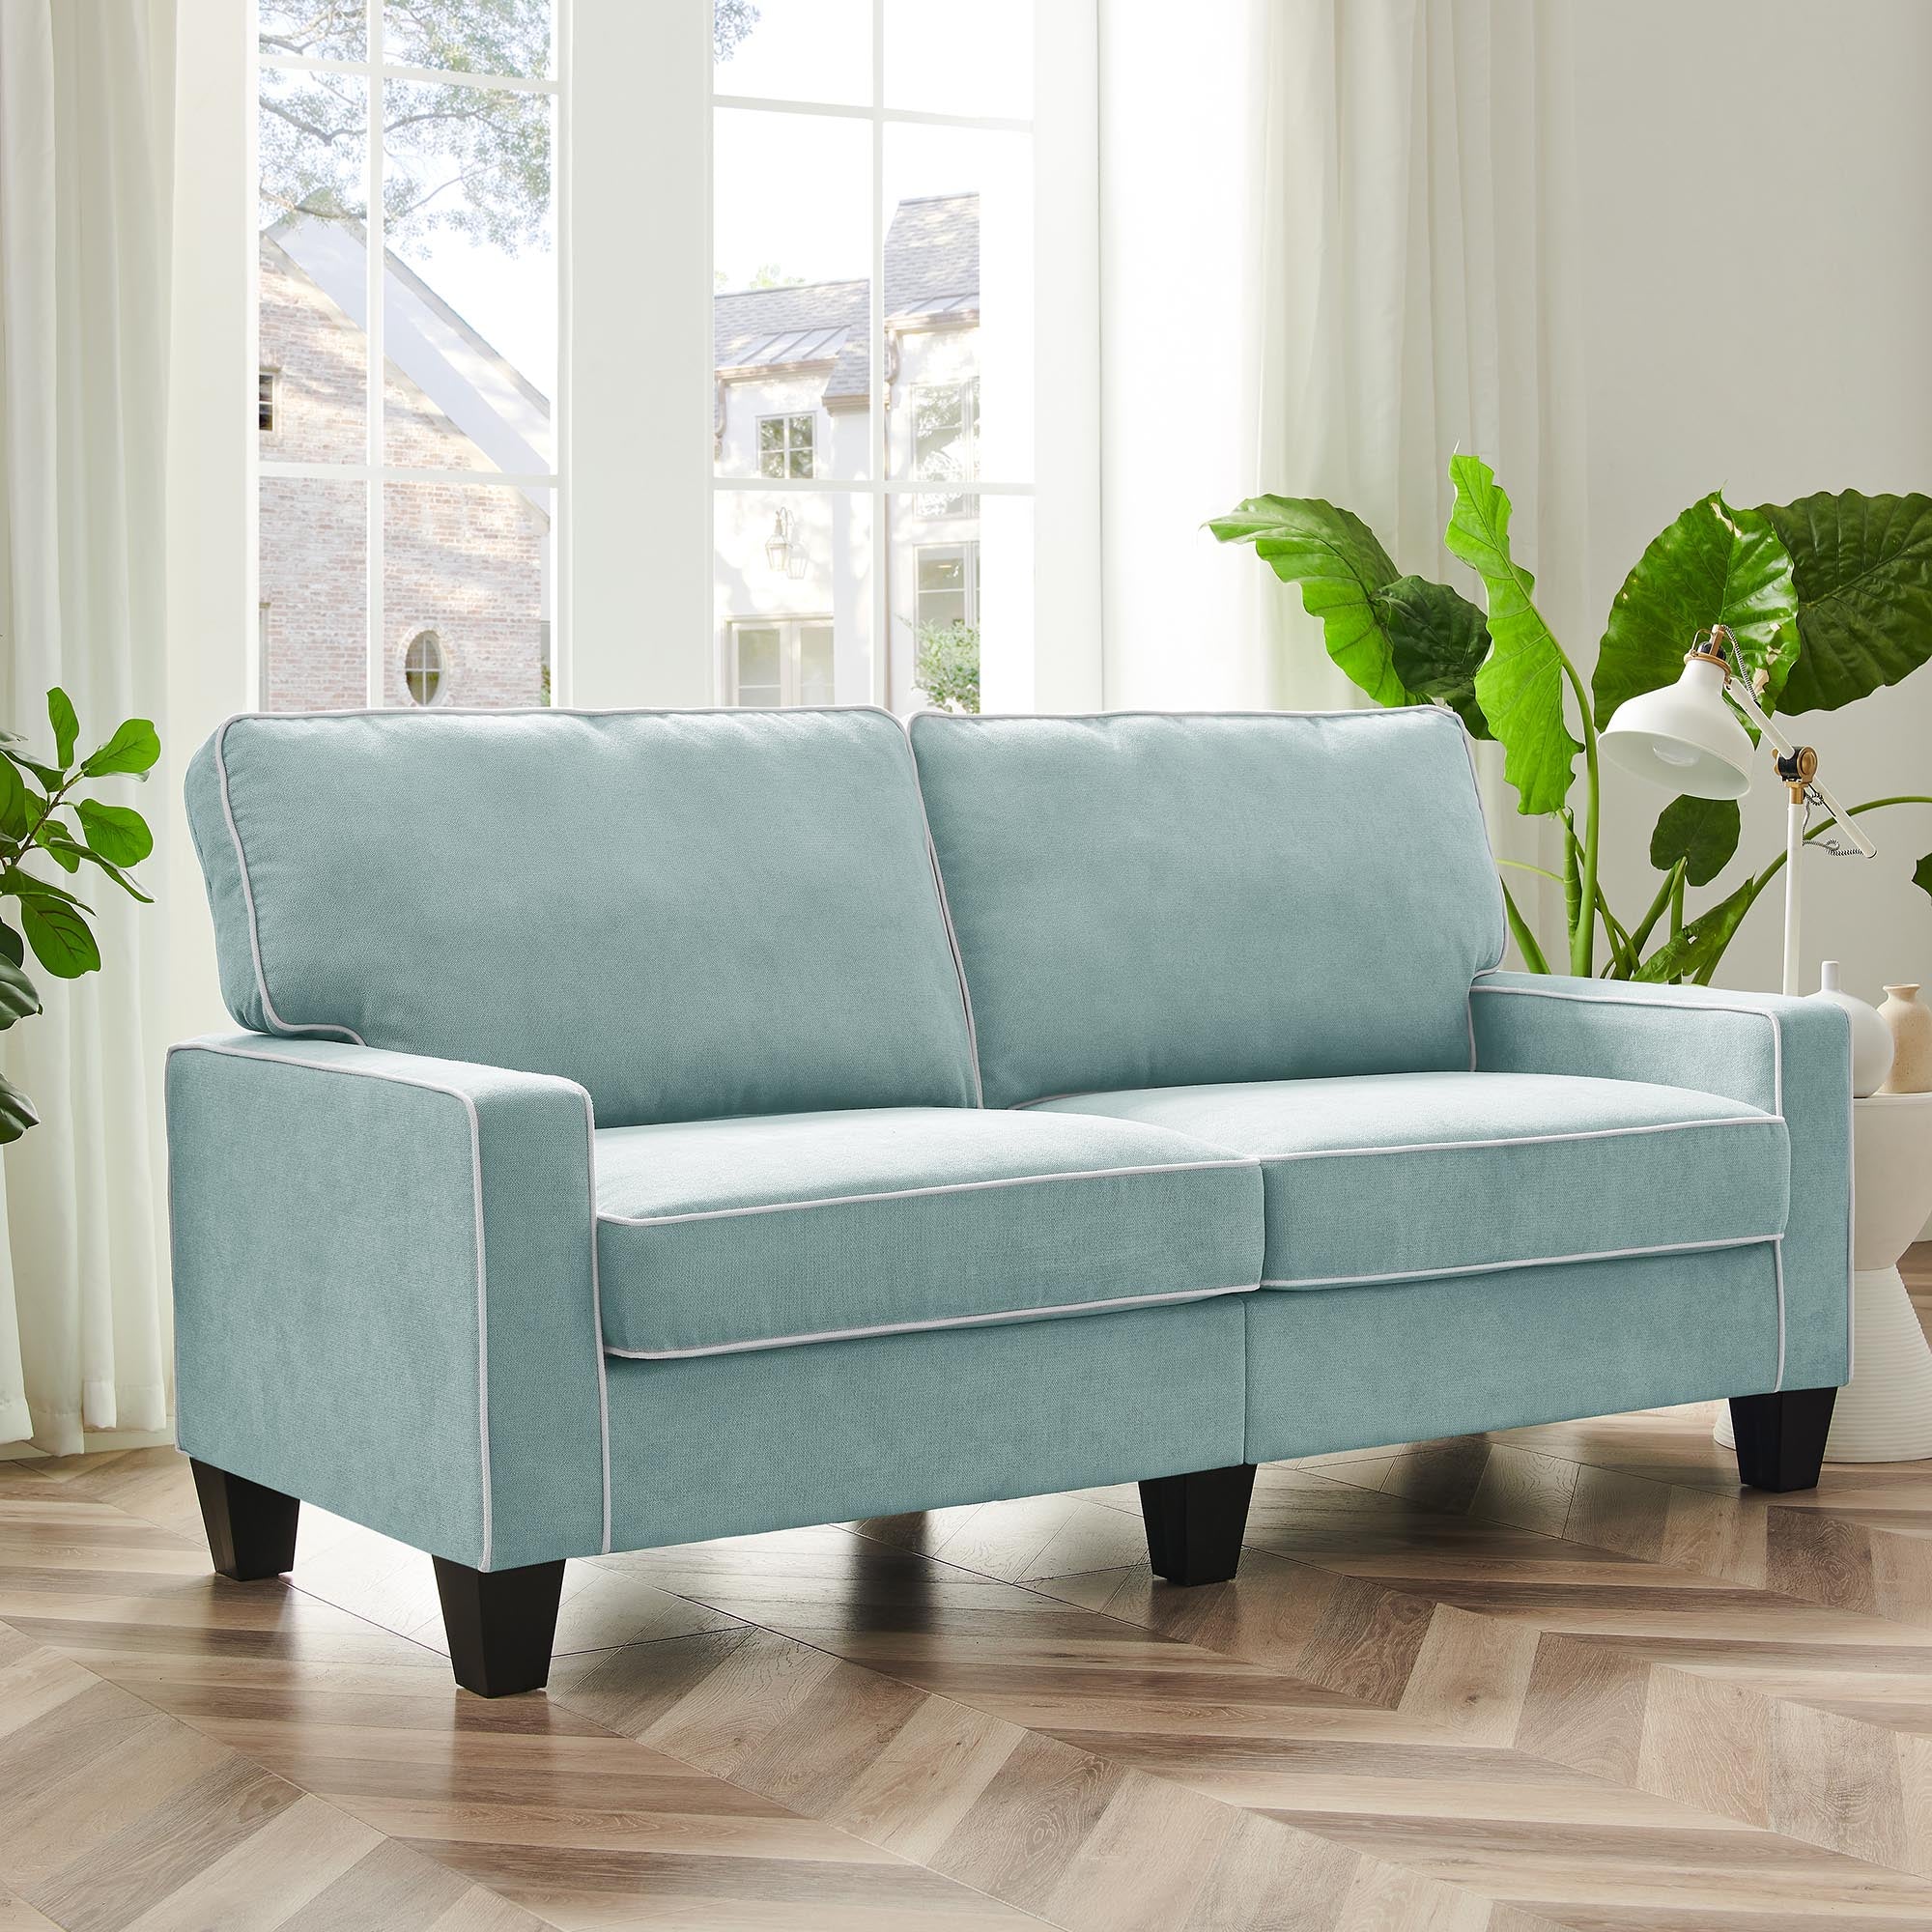 Sherbrook Large 2-Seater Mint Brushed Fabric Sofa with Contrasting Piping